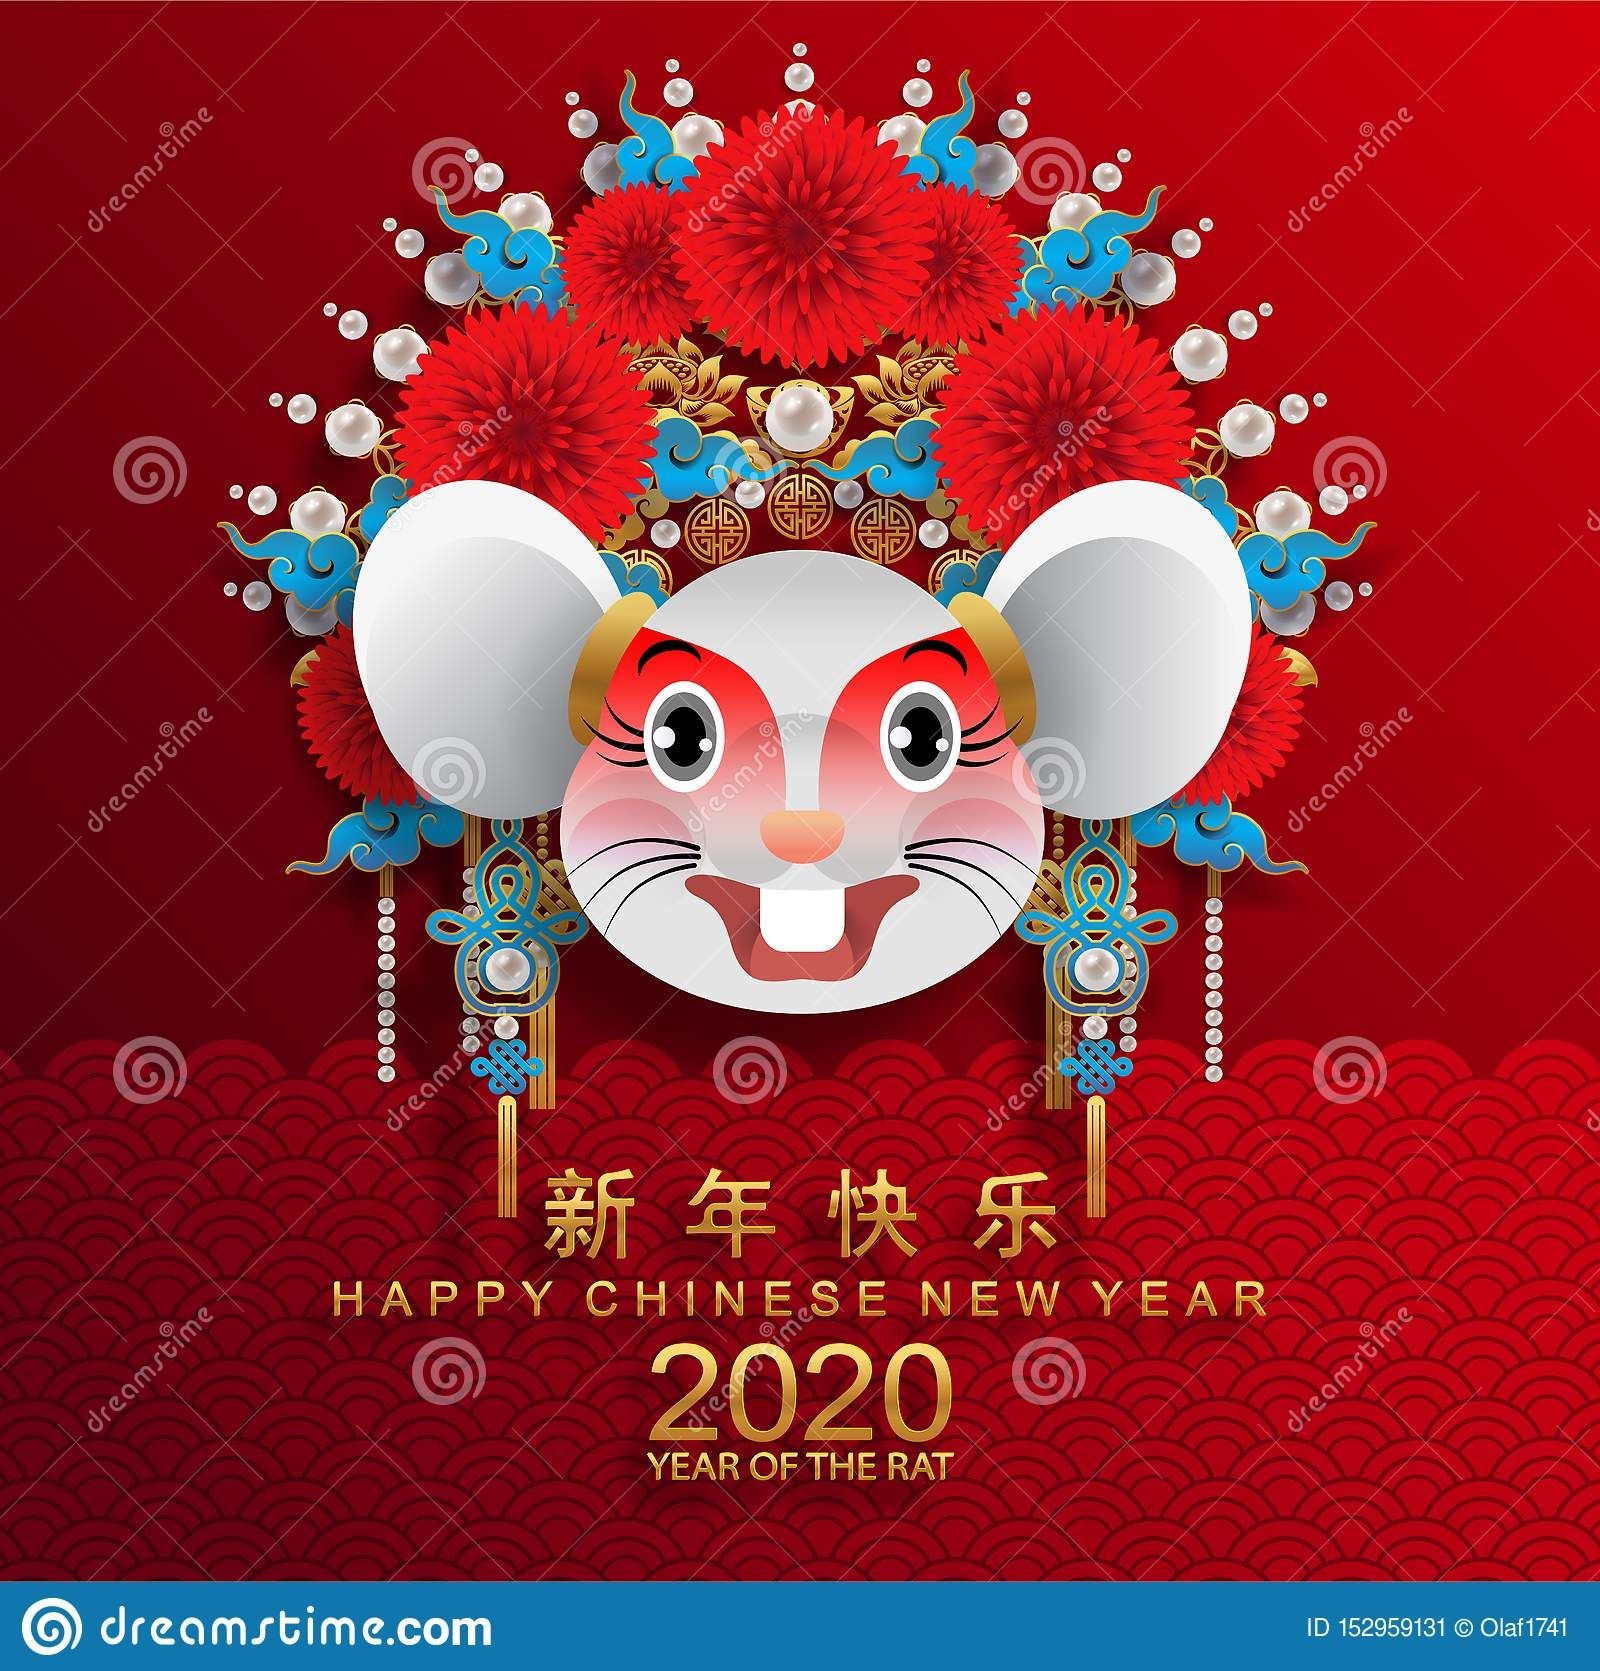 Happy Chinese New Year 2020 Year Of The Rat. Stock Vector